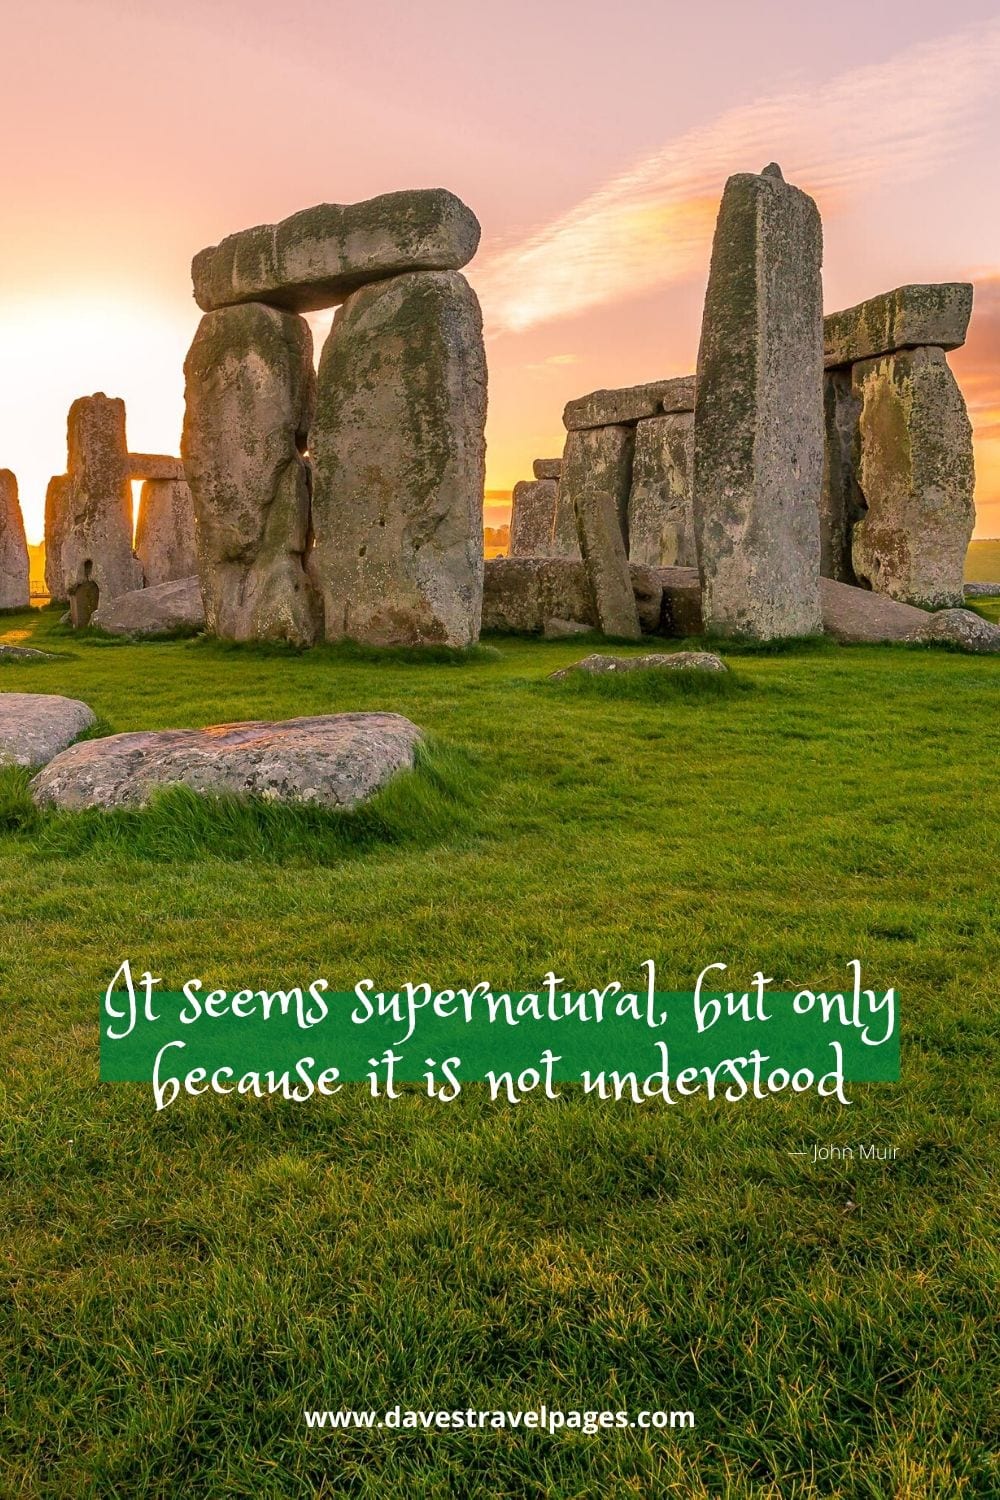 “It seems supernatural, but only because it is not understood.”― John Muir